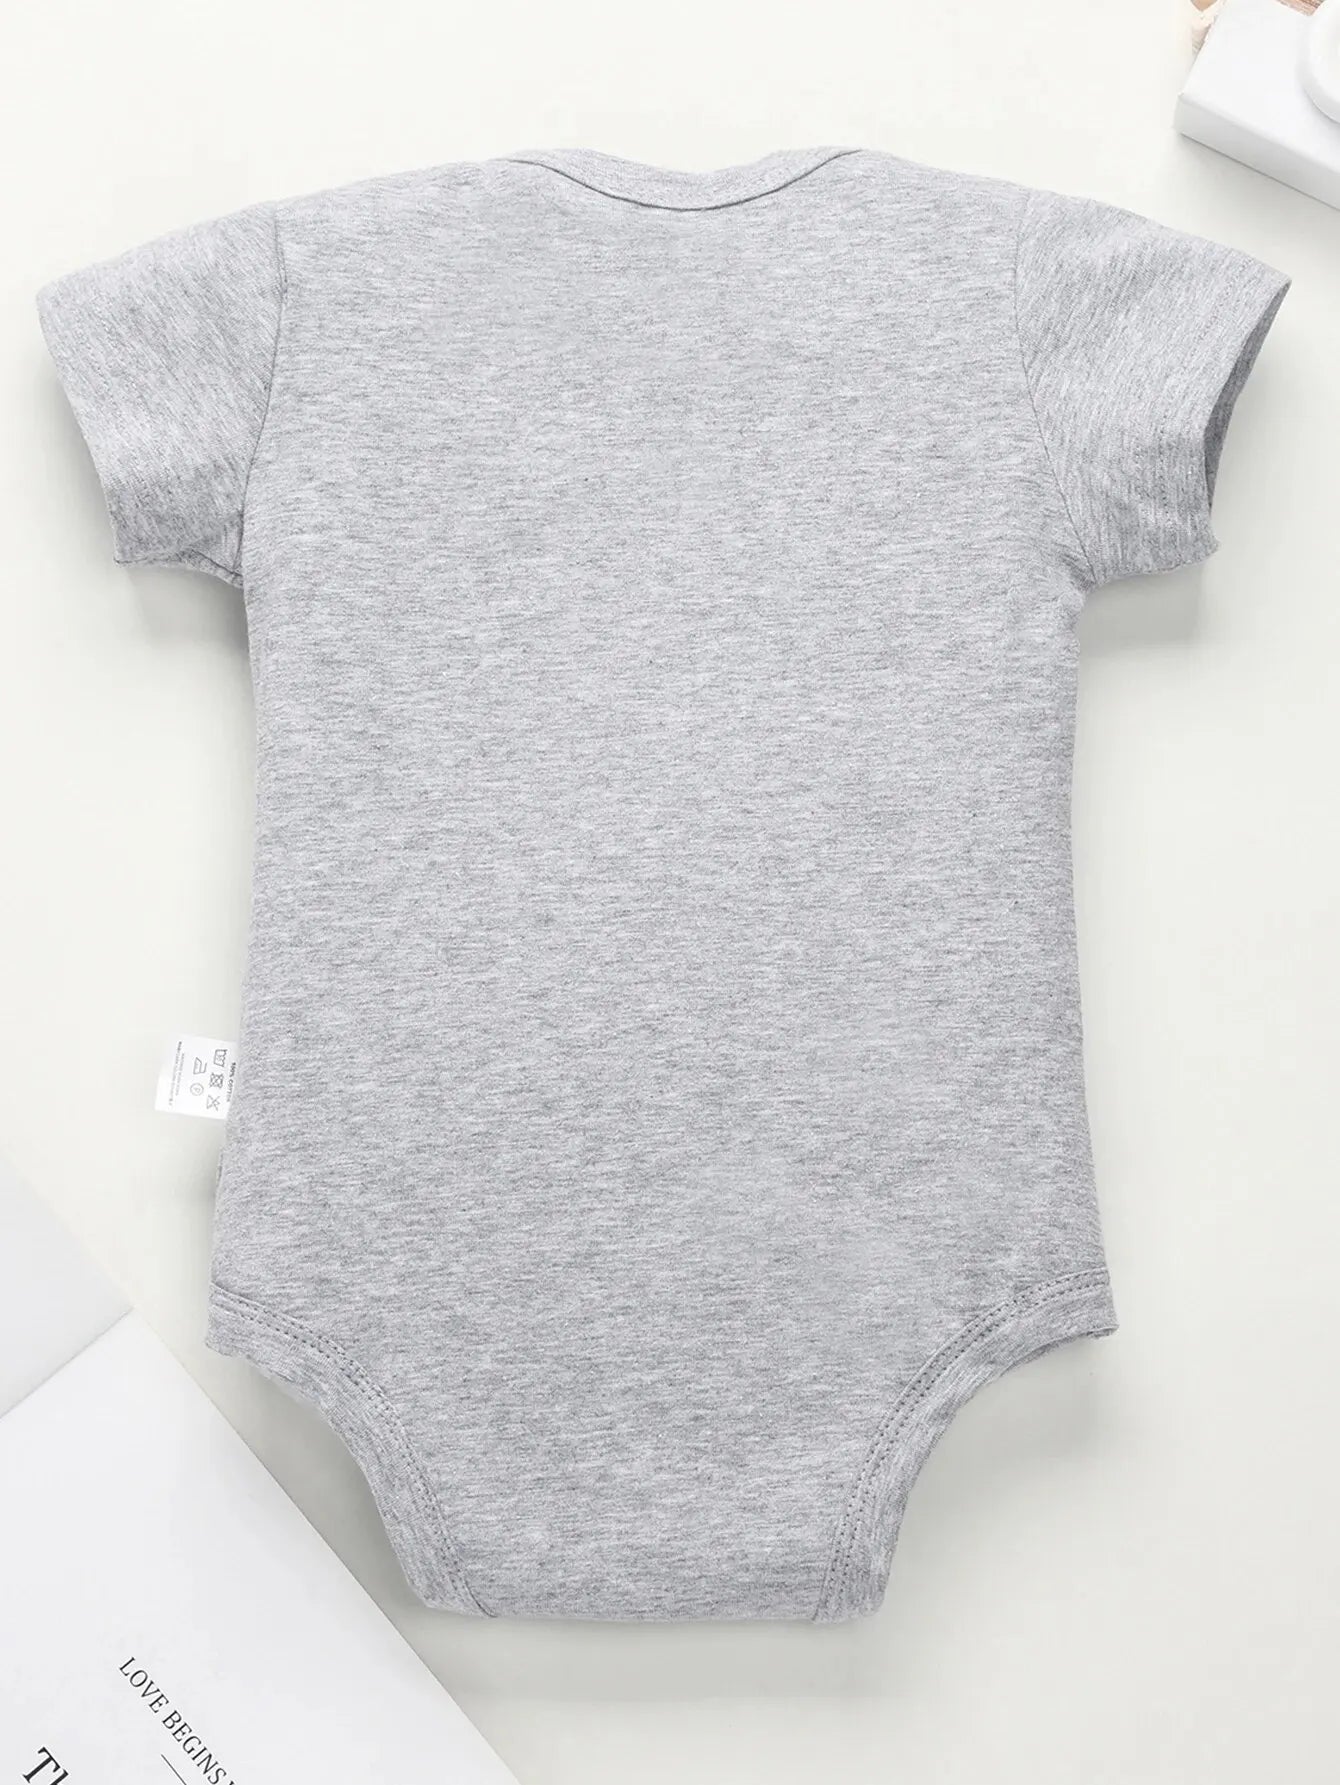 "50% DADDY 50% MOMMY 100% PERFECT Baby Romper - Perfect Gift for Newborns"